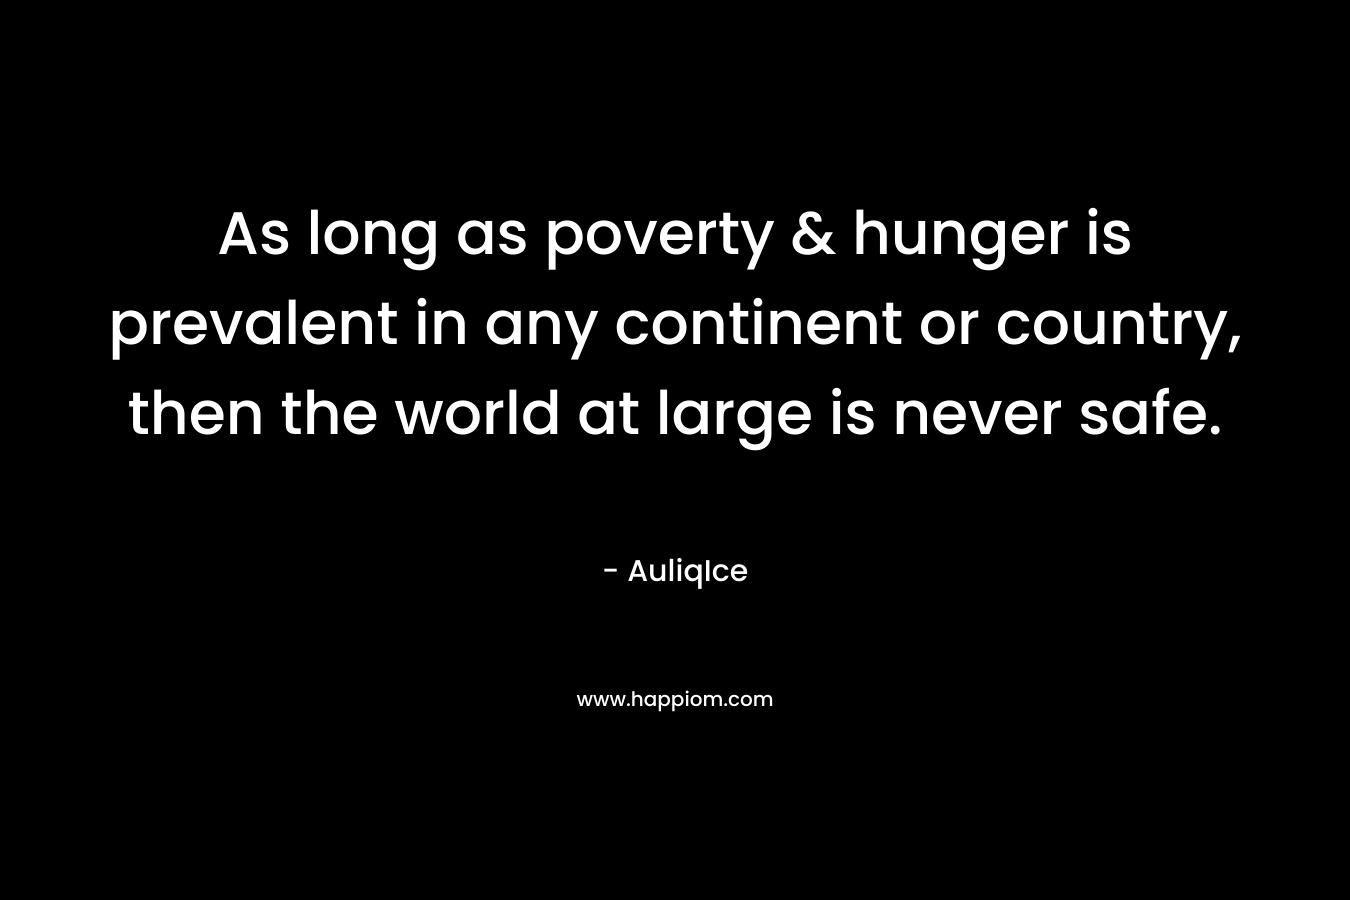 As long as poverty & hunger is prevalent in any continent or country, then the world at large is never safe. – AuliqIce